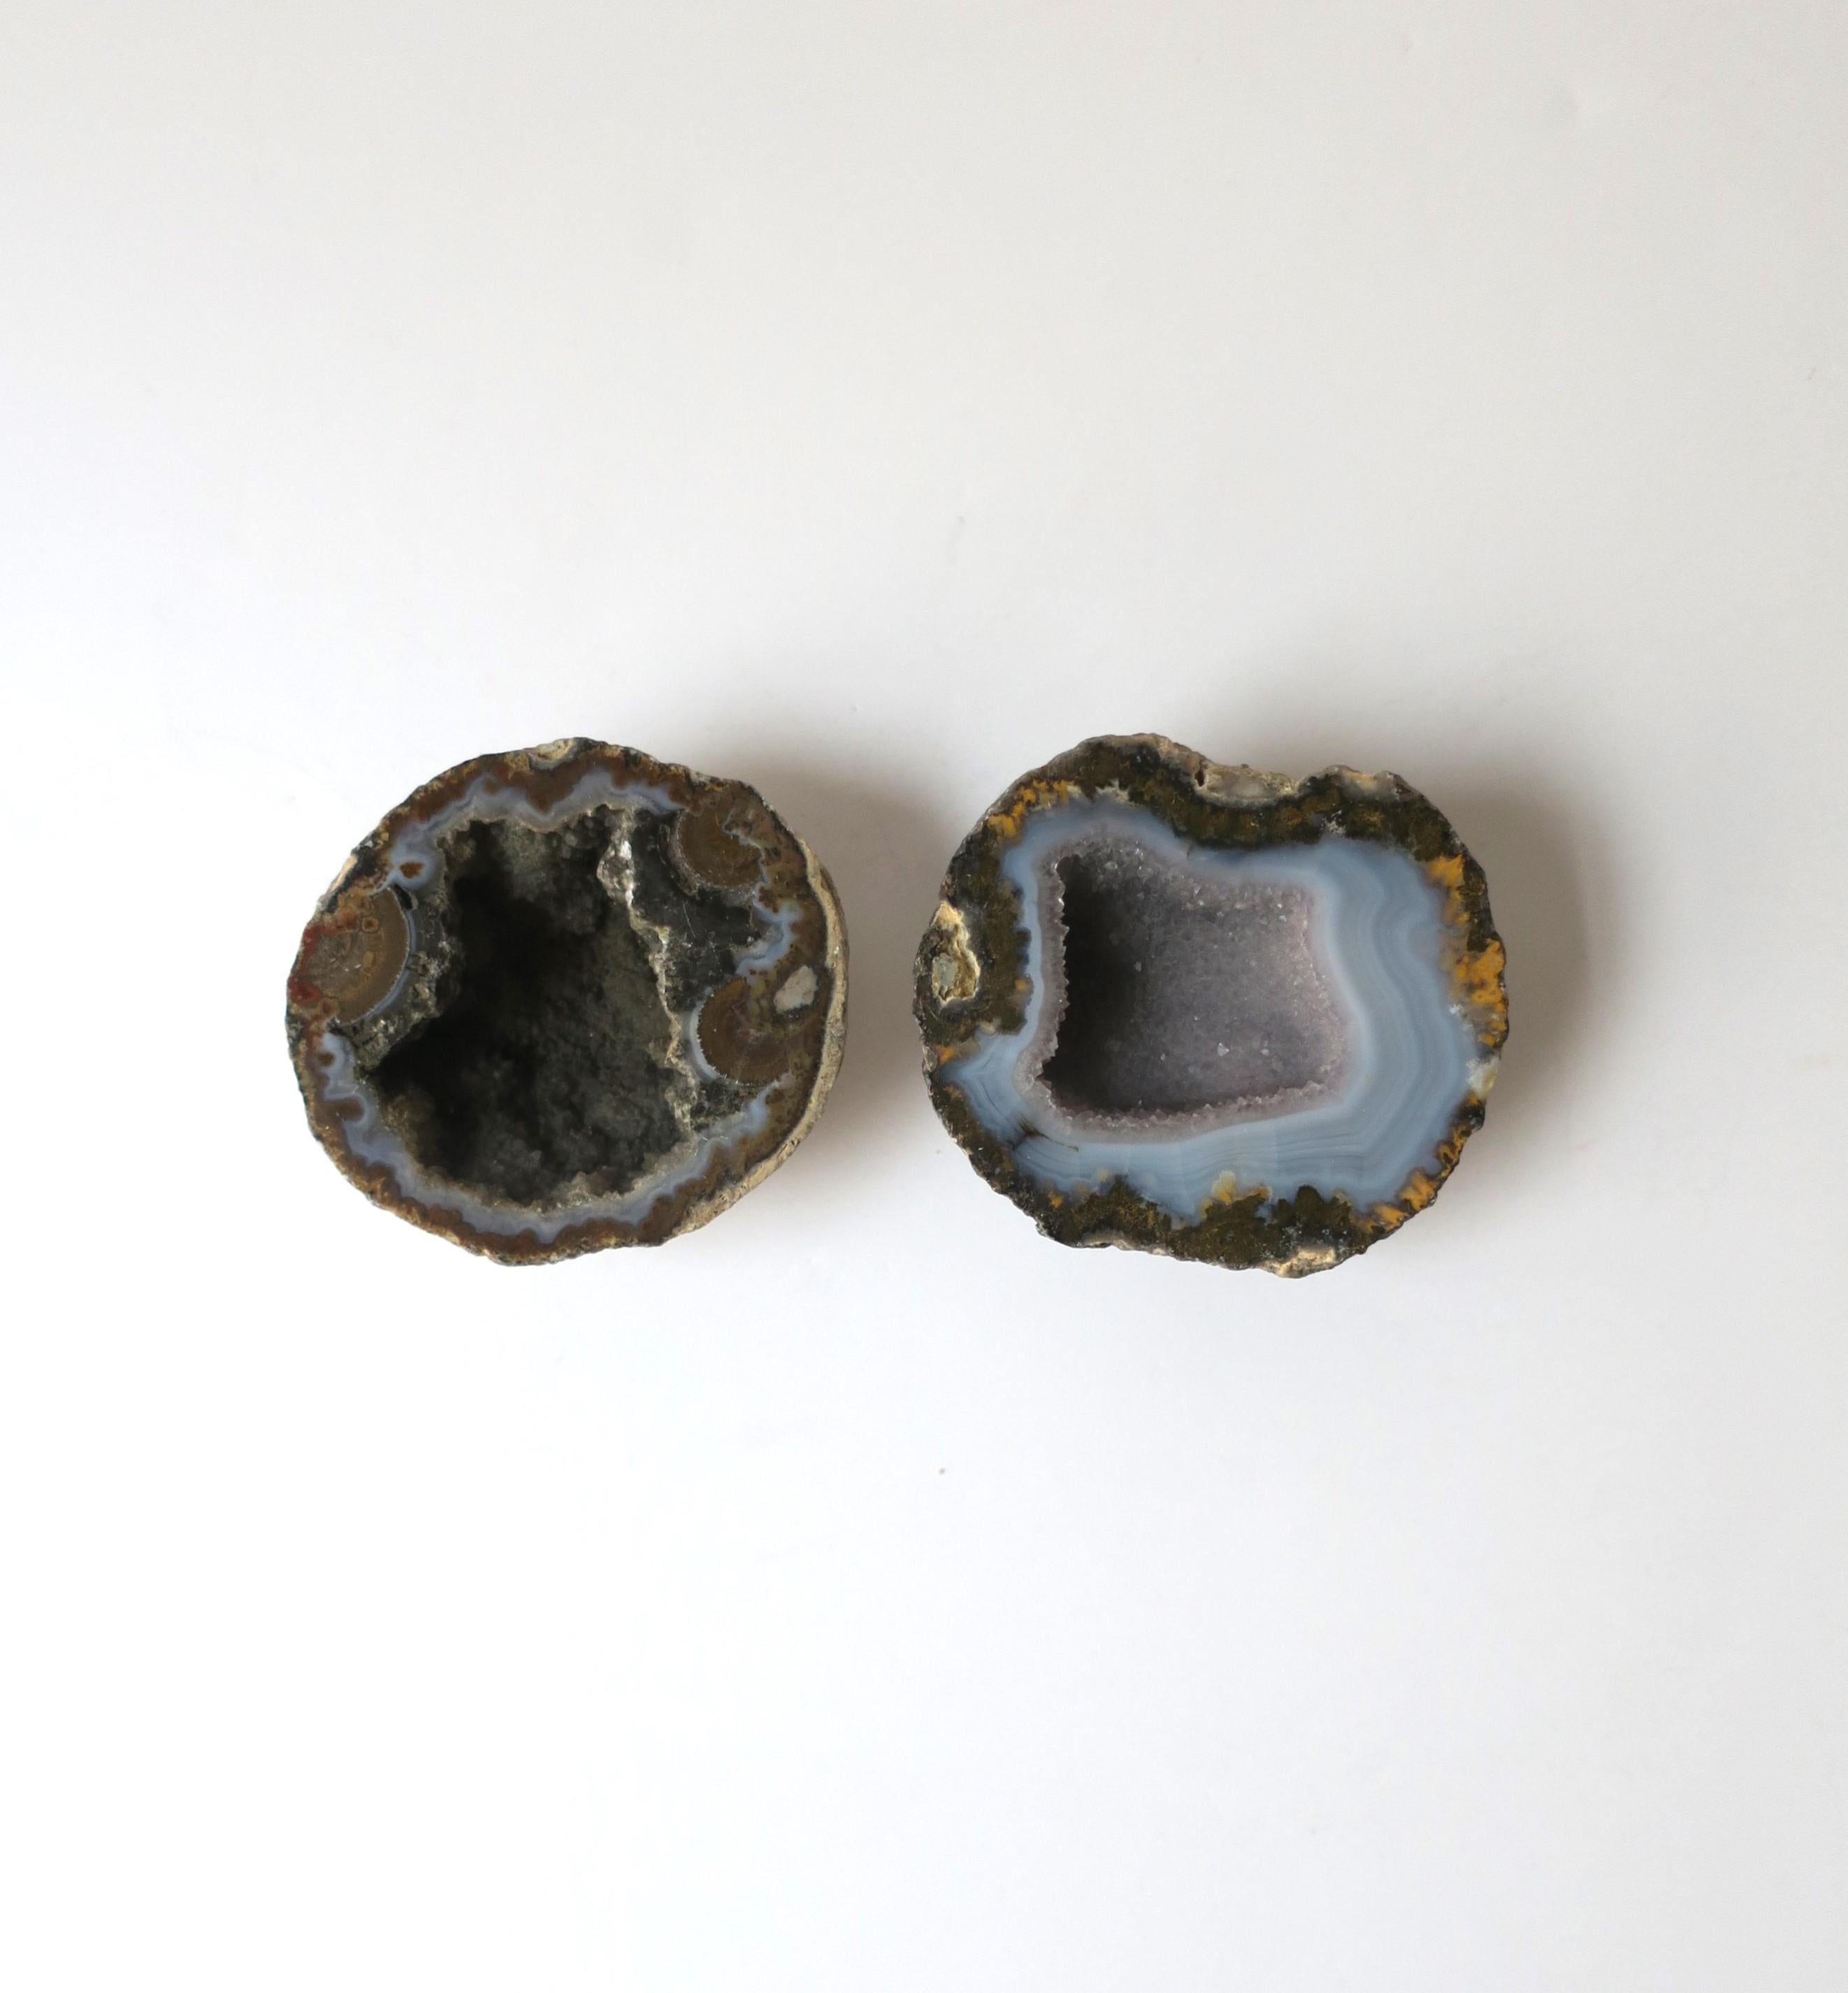 A beautiful, natural set of two (2) onyx agate geode objects. Colors include light blue, grey, and browns.

Dimensions: 
3